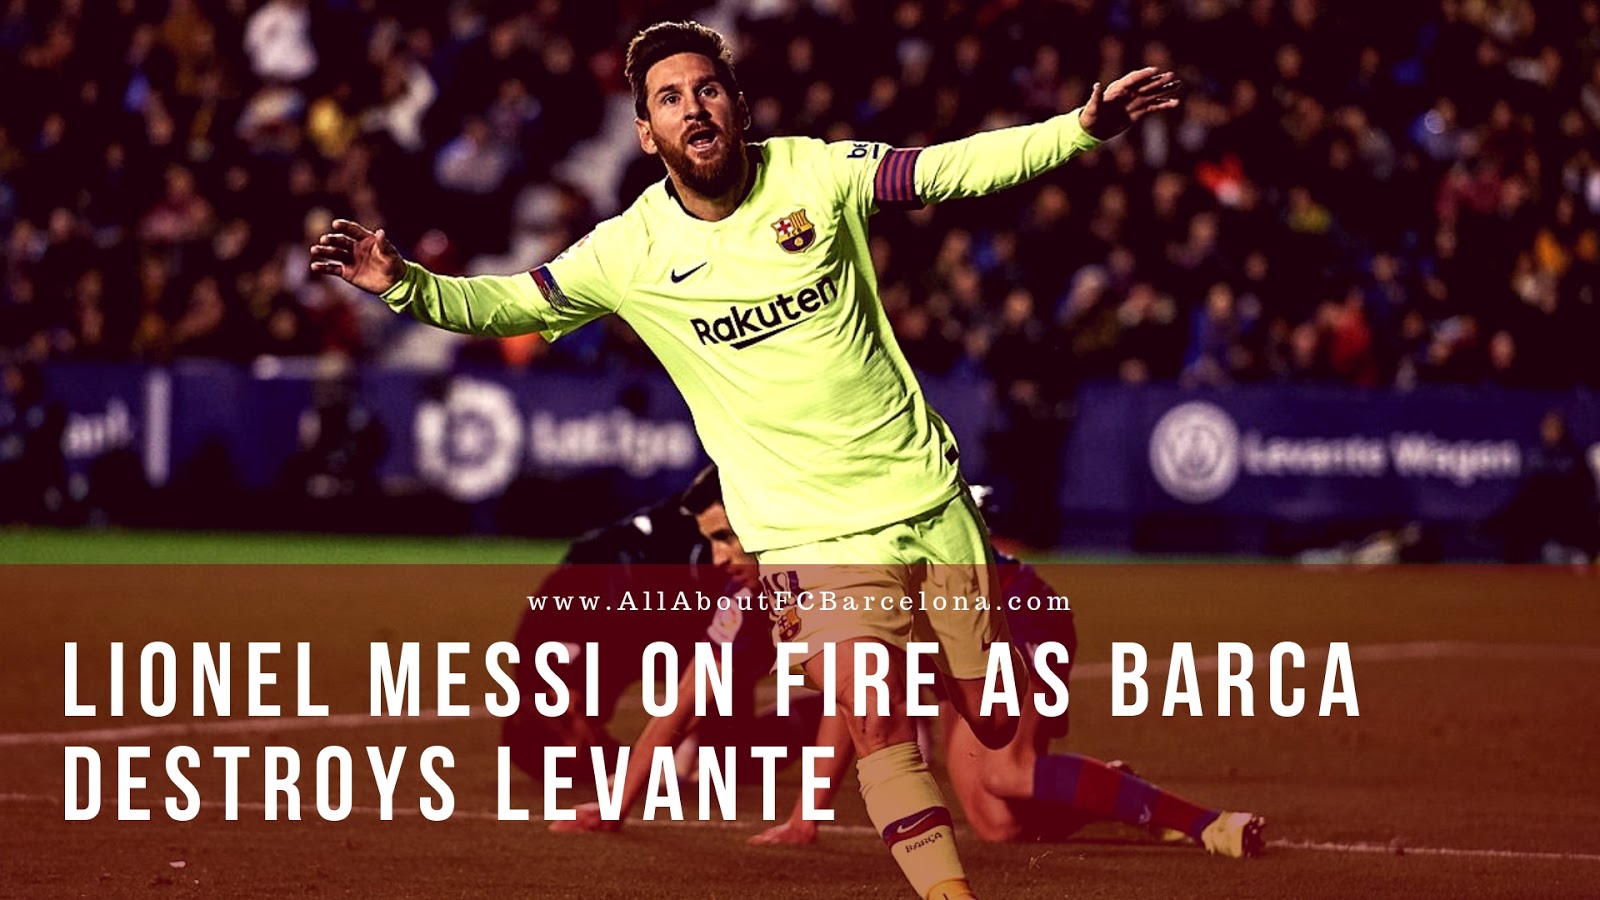 Sensational Lionel Messi destroys Levante with an Out of the World Performance